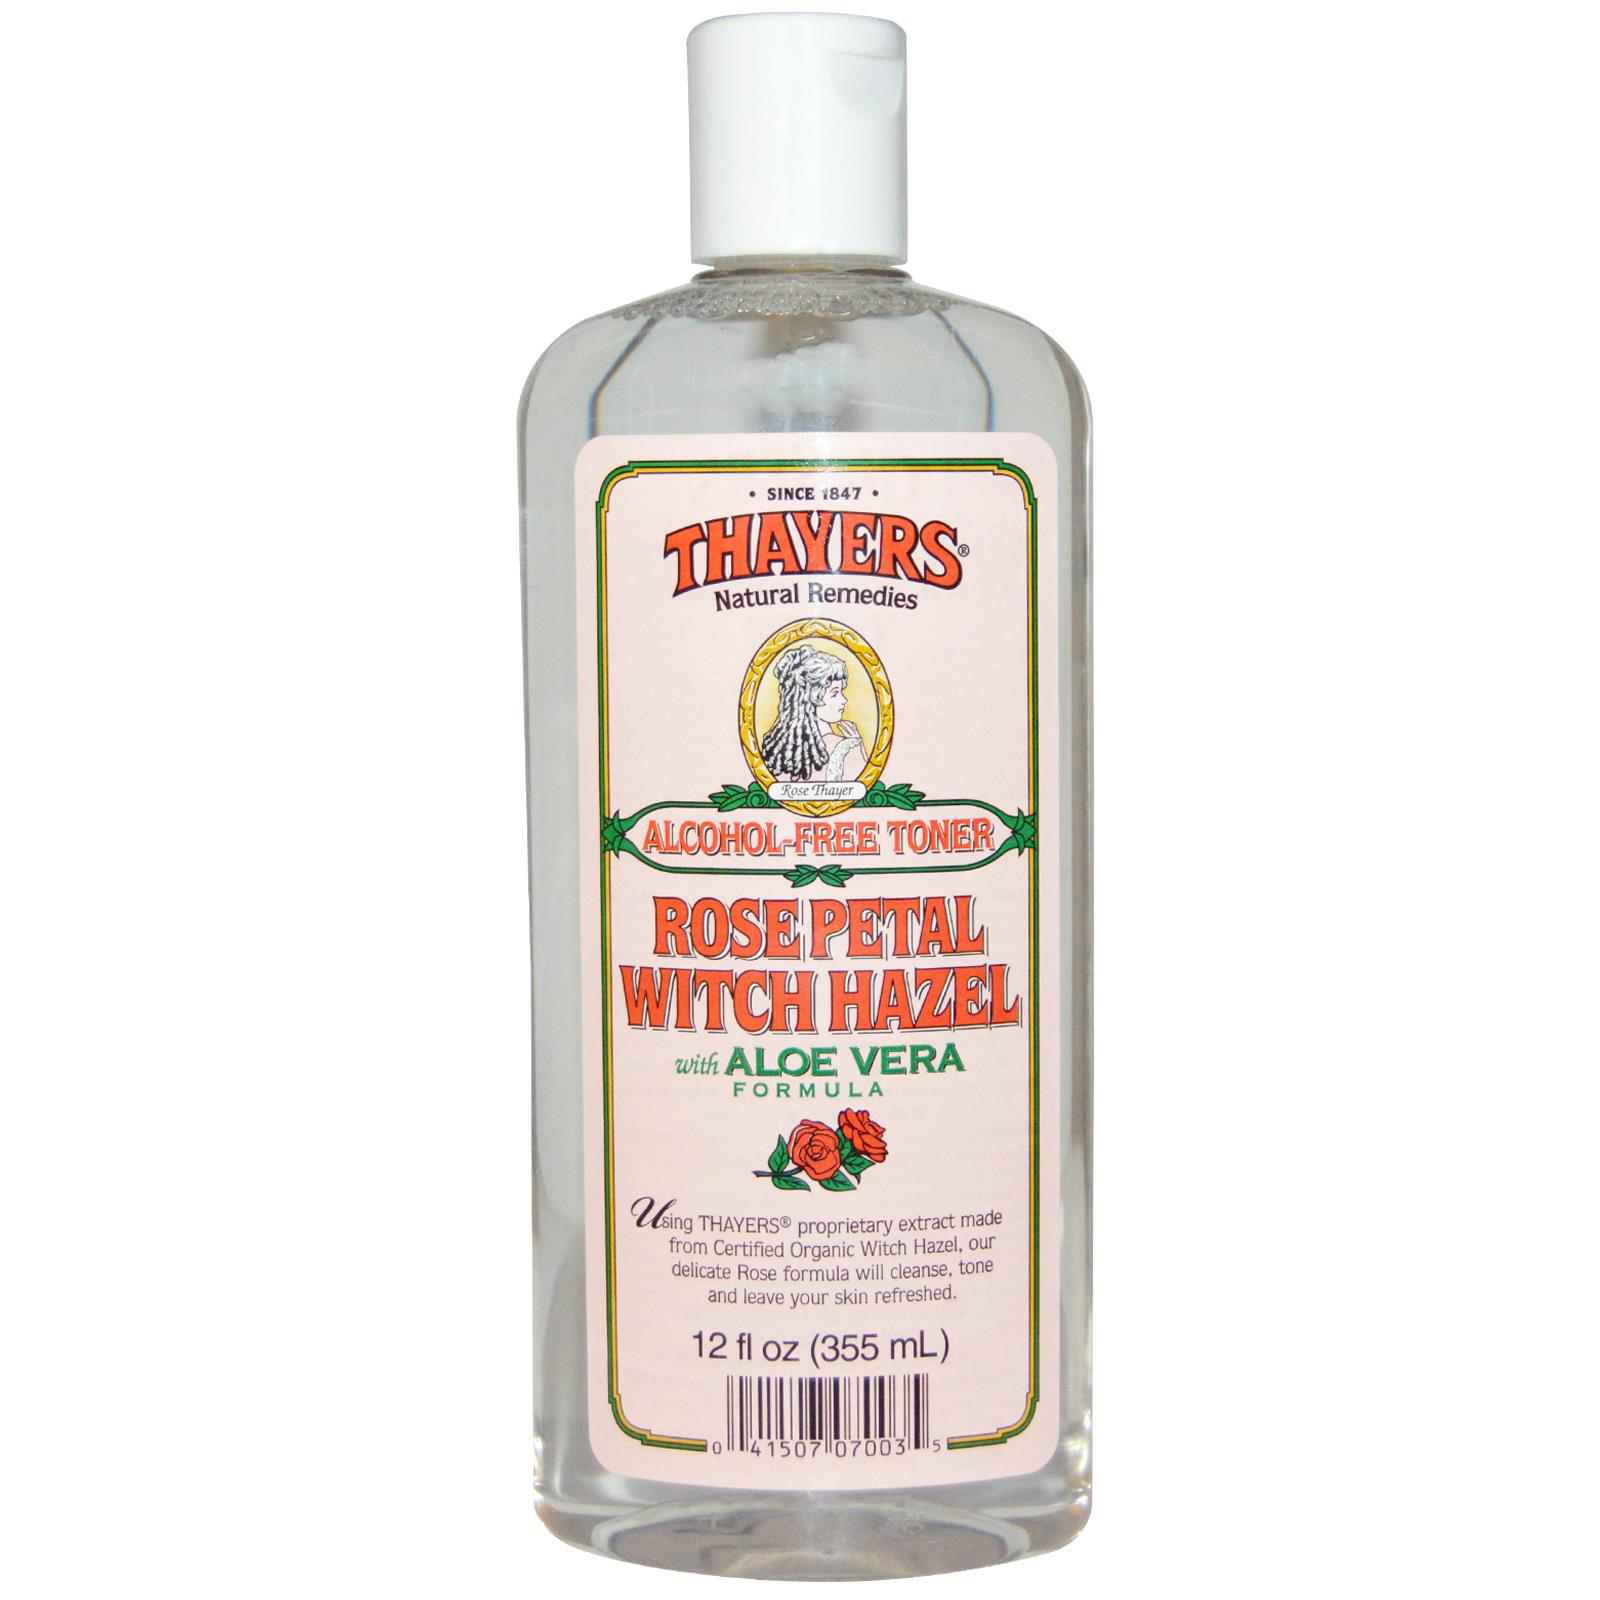 Beauty Secret  “Thayers makes toner with a light rose scent. It’s refreshing during our humid summers.” Whole Foods, $10